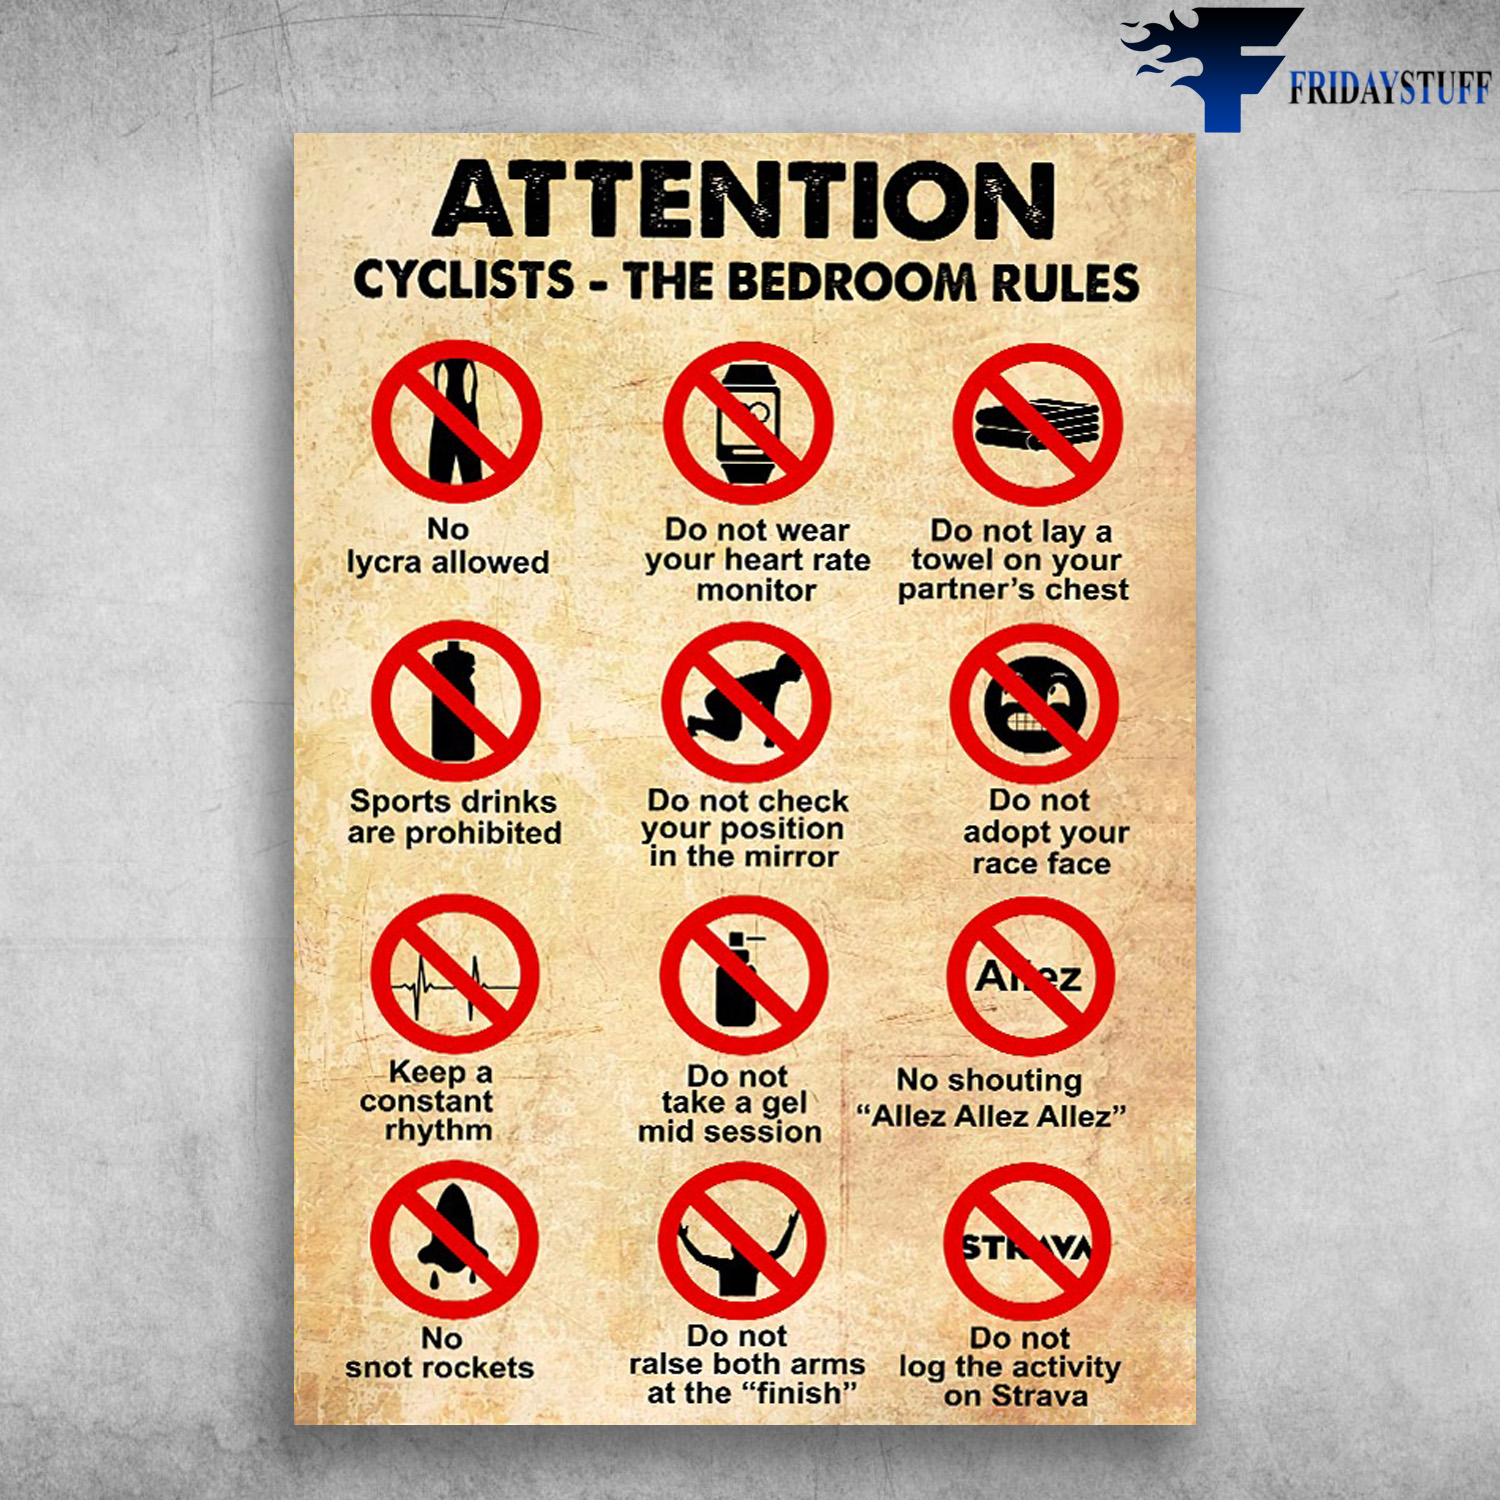 Bedroom Warning, Attention Cyclists, The Bedroom Rules - No Lycra Allowed, Do Not Wear Your Heart Rate Motitor, Do Not Lay A Towel On Your Partner's Chest, Sports Drinks Are Prohibited, Do Not Check Your Position In Your Mirror